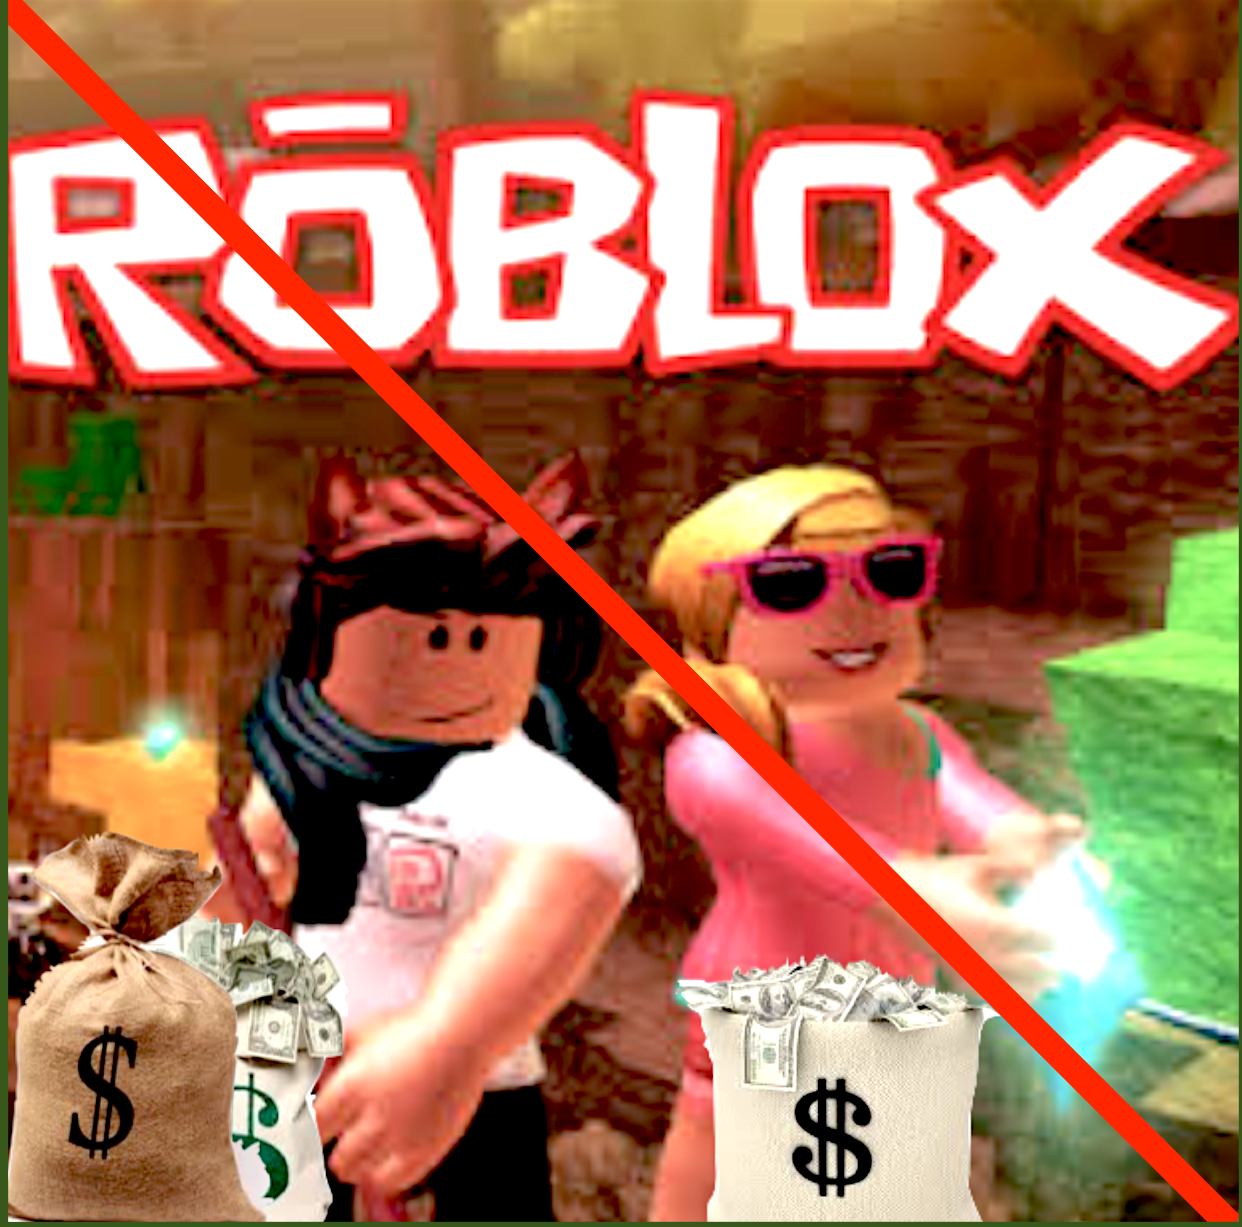 Hey Roblox Leave Them Kids Alone By Danielle Fenton Medium - how to reactivate bc charge on roblox